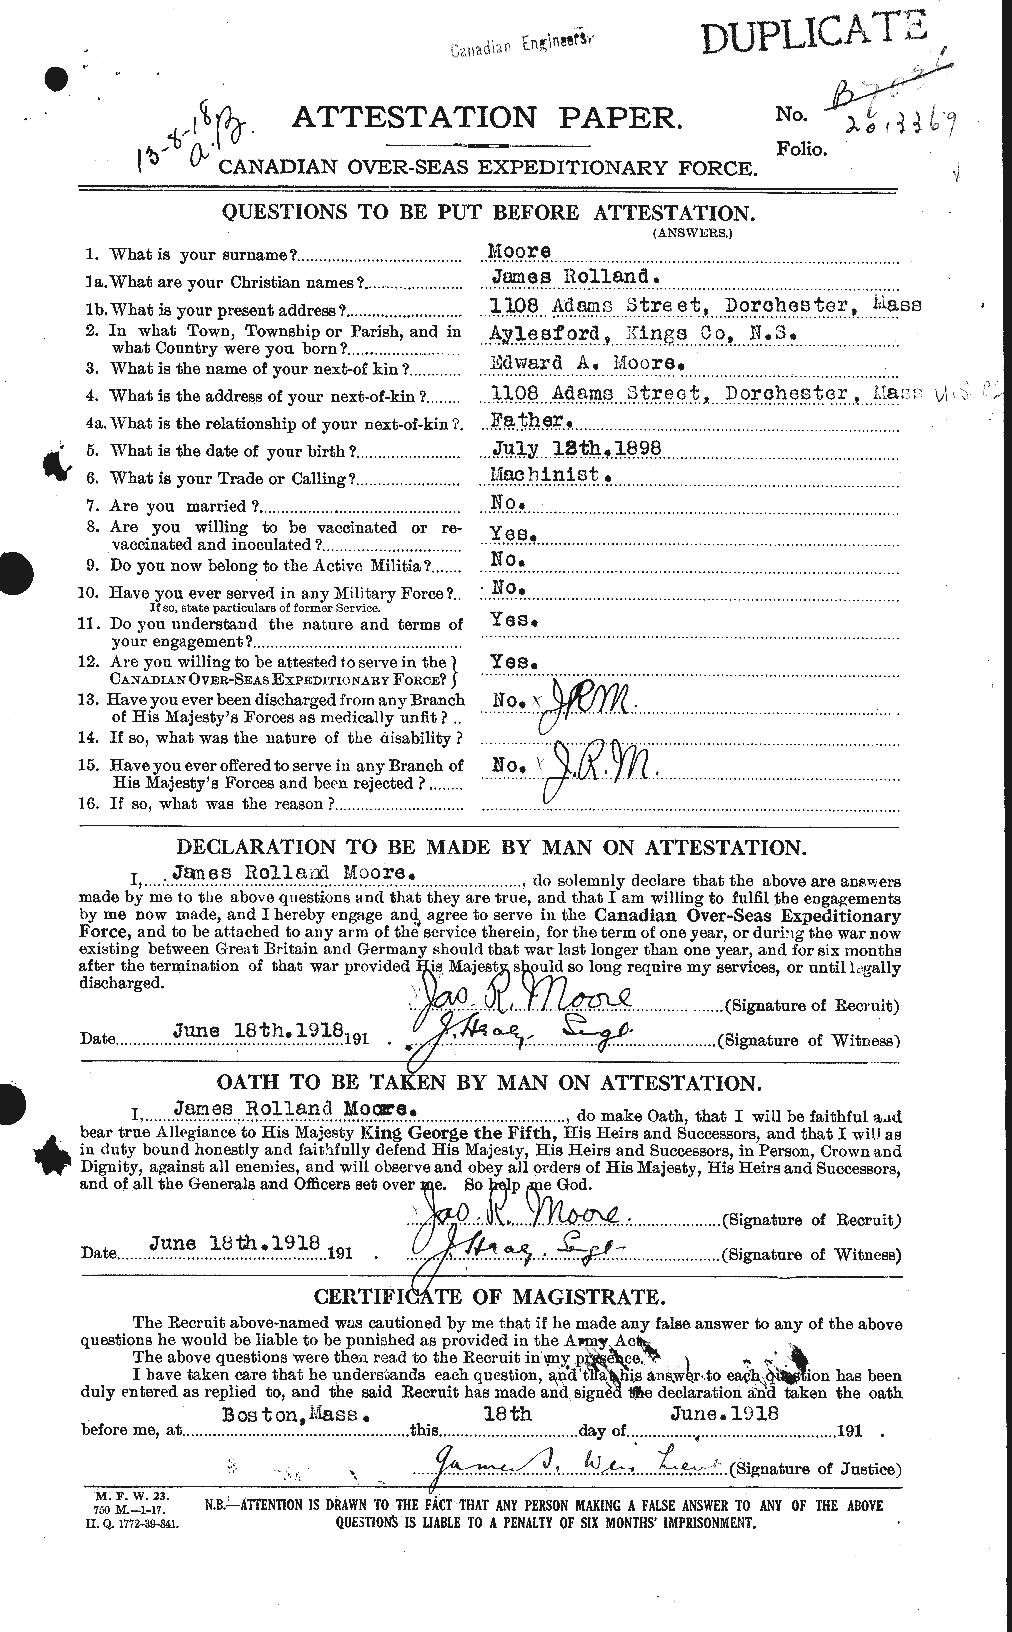 Personnel Records of the First World War - CEF 502237a